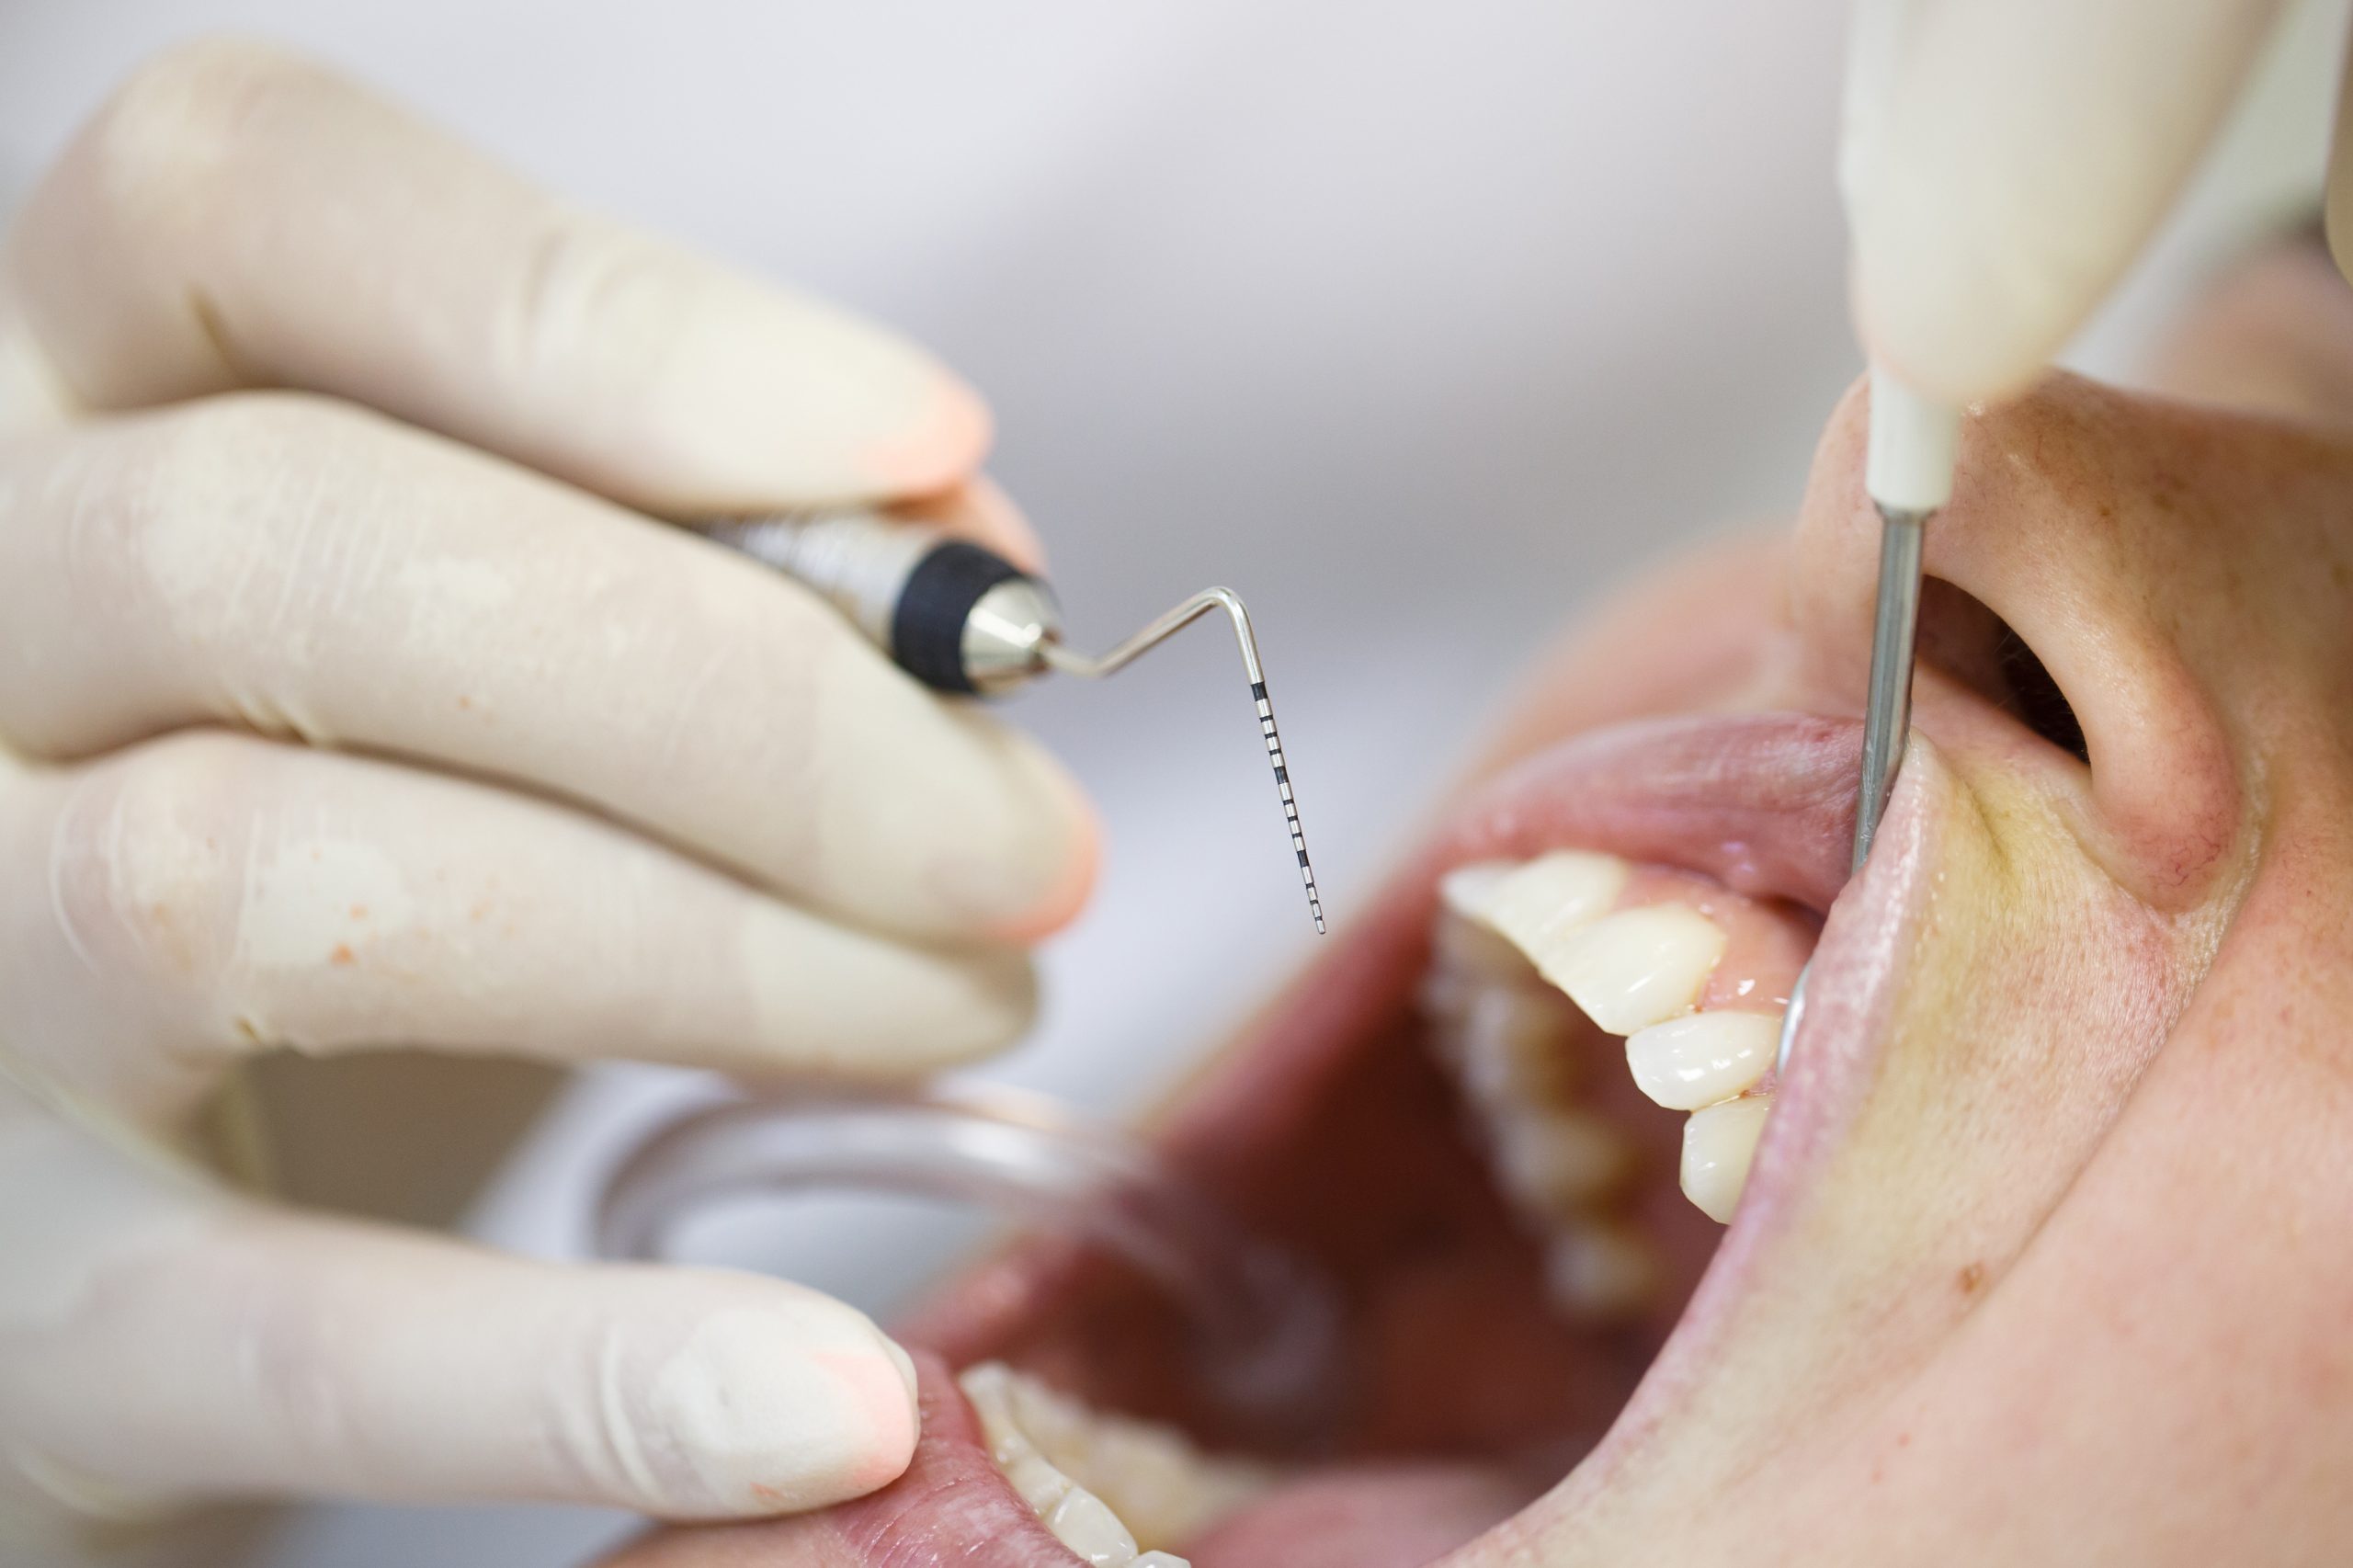 Periodontal probe, held by dental hygienist, measuring pocket depths around tooth, examining progression of periodontal disease. Dental hygiene, periodontal disease and prevention concept.